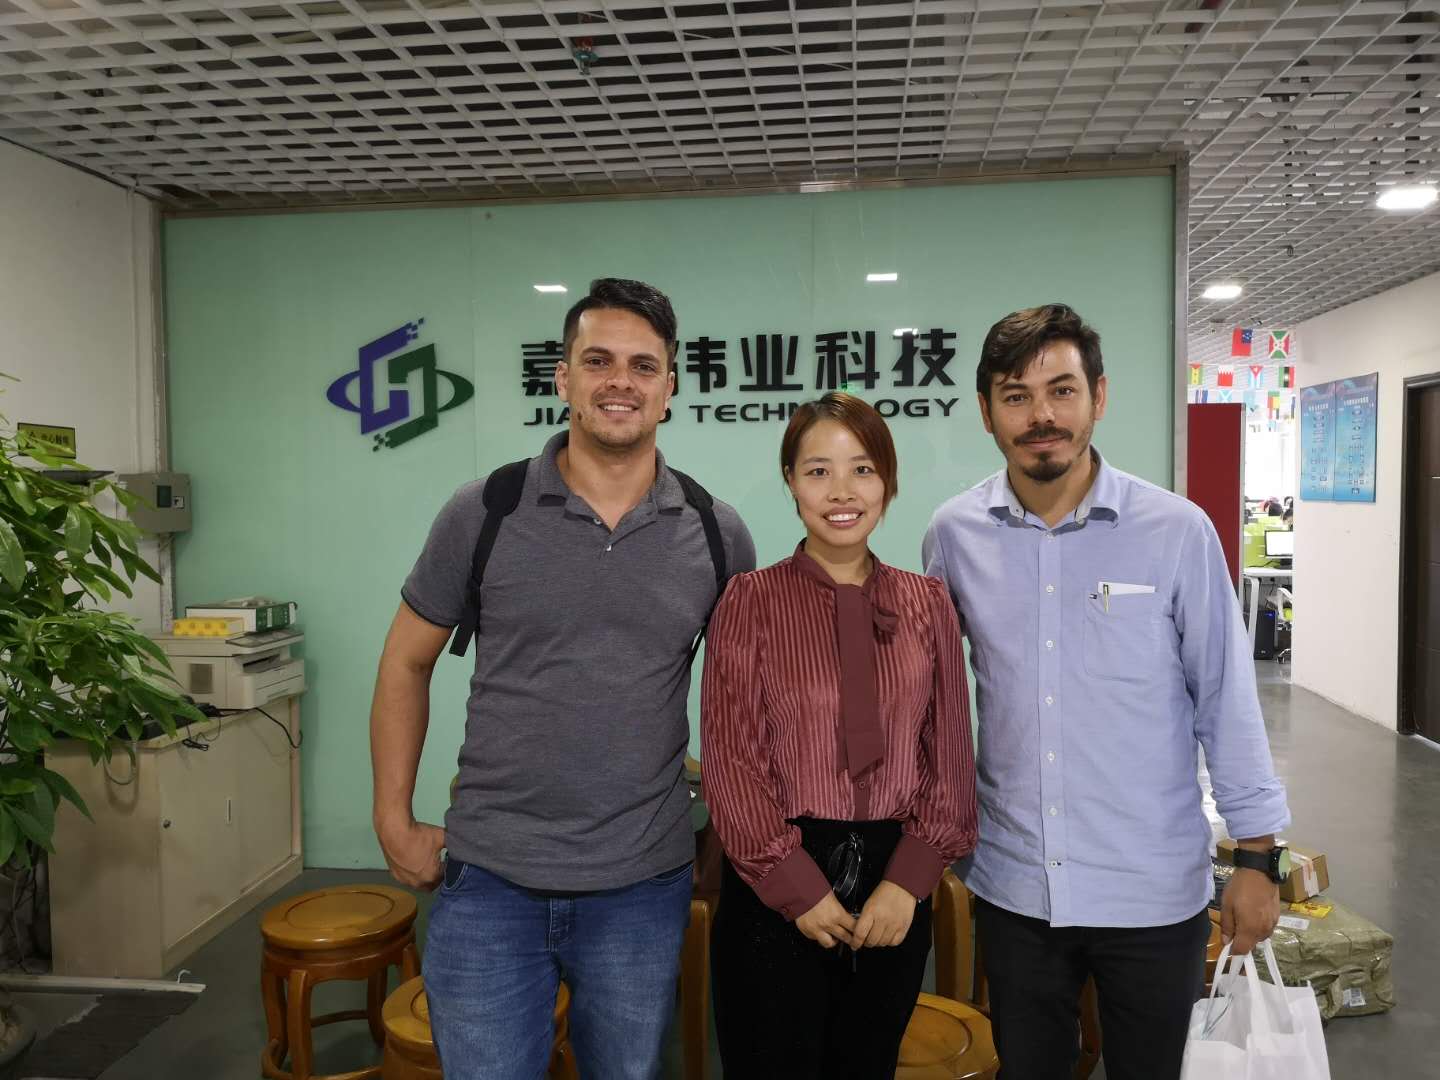 Brazilian Clients Visit Johope After Shanghai Appp Expo.. 